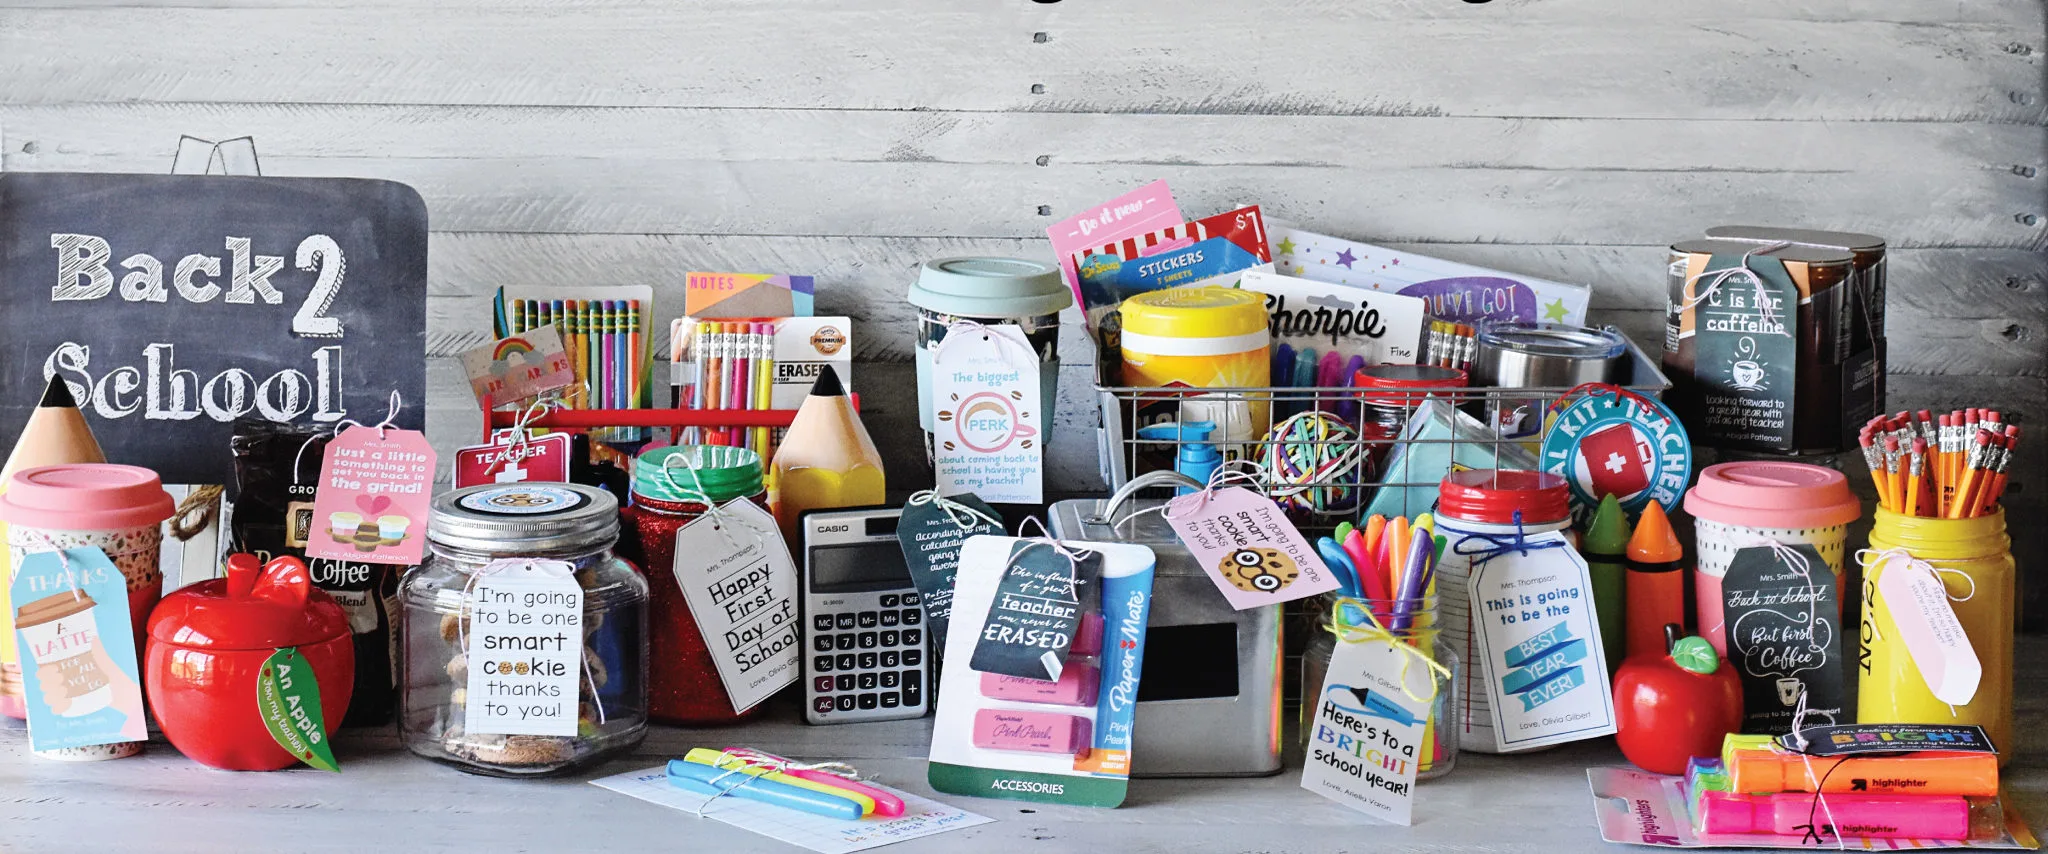 25 Must Have Teacher Supplies! Back to School Ideas for the